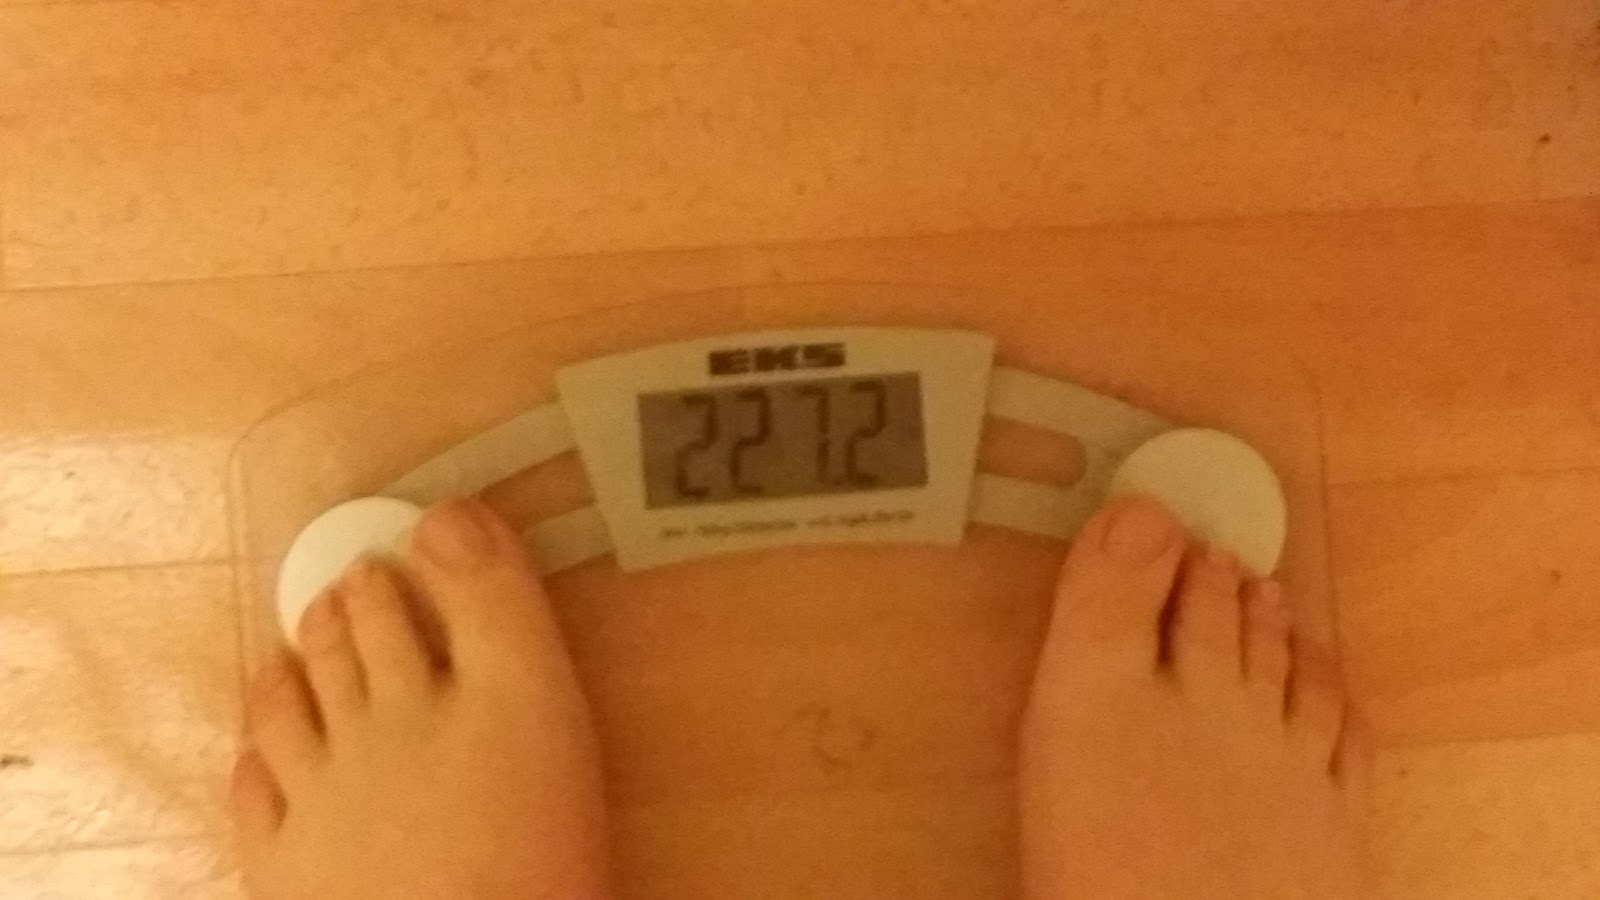 weight loss scales 227.2lbs